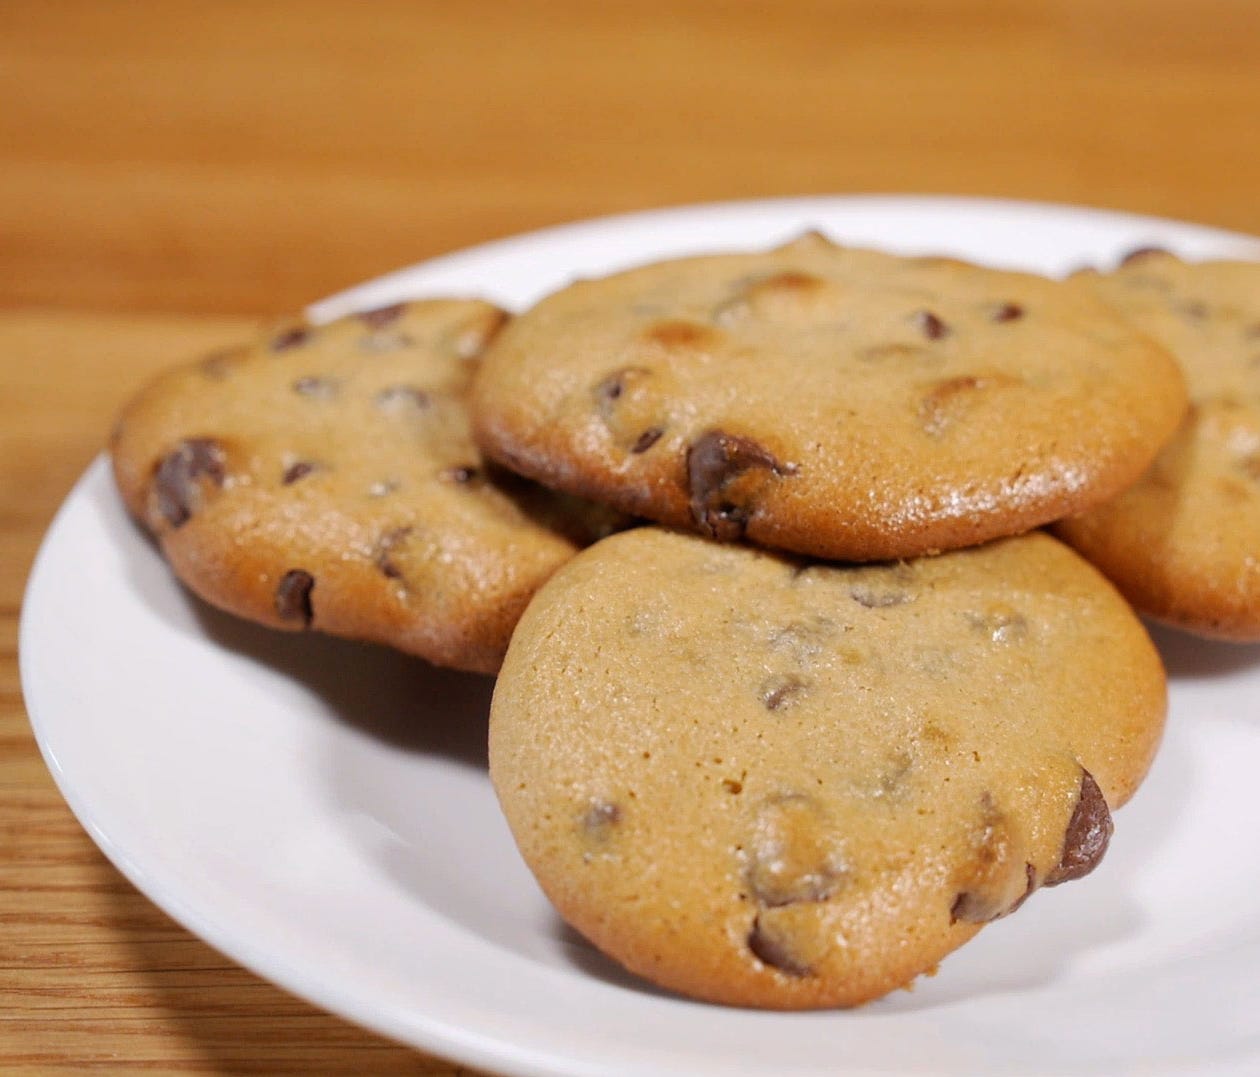 These chocolate chip tahini cookies are gluten and dairy-free.